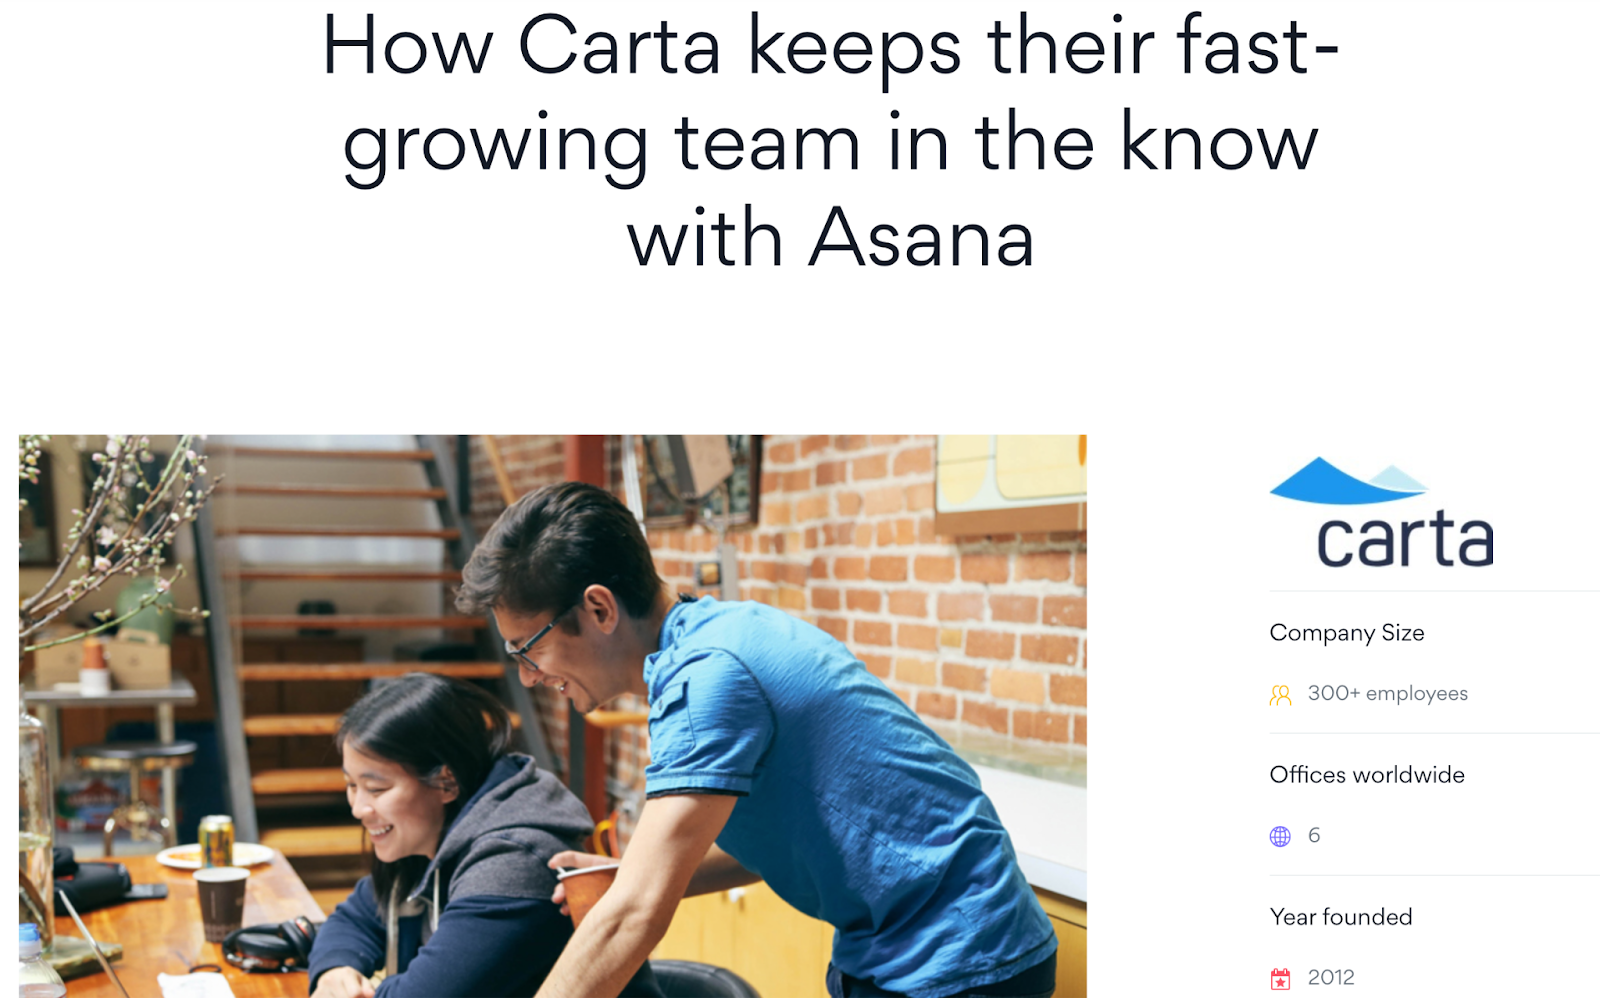 The heading "How Carta keeps their fast-growing team in the know with Asana", sits above an image of someone sitting at a desk while another person stands over their shoulder. Both are smiling. 